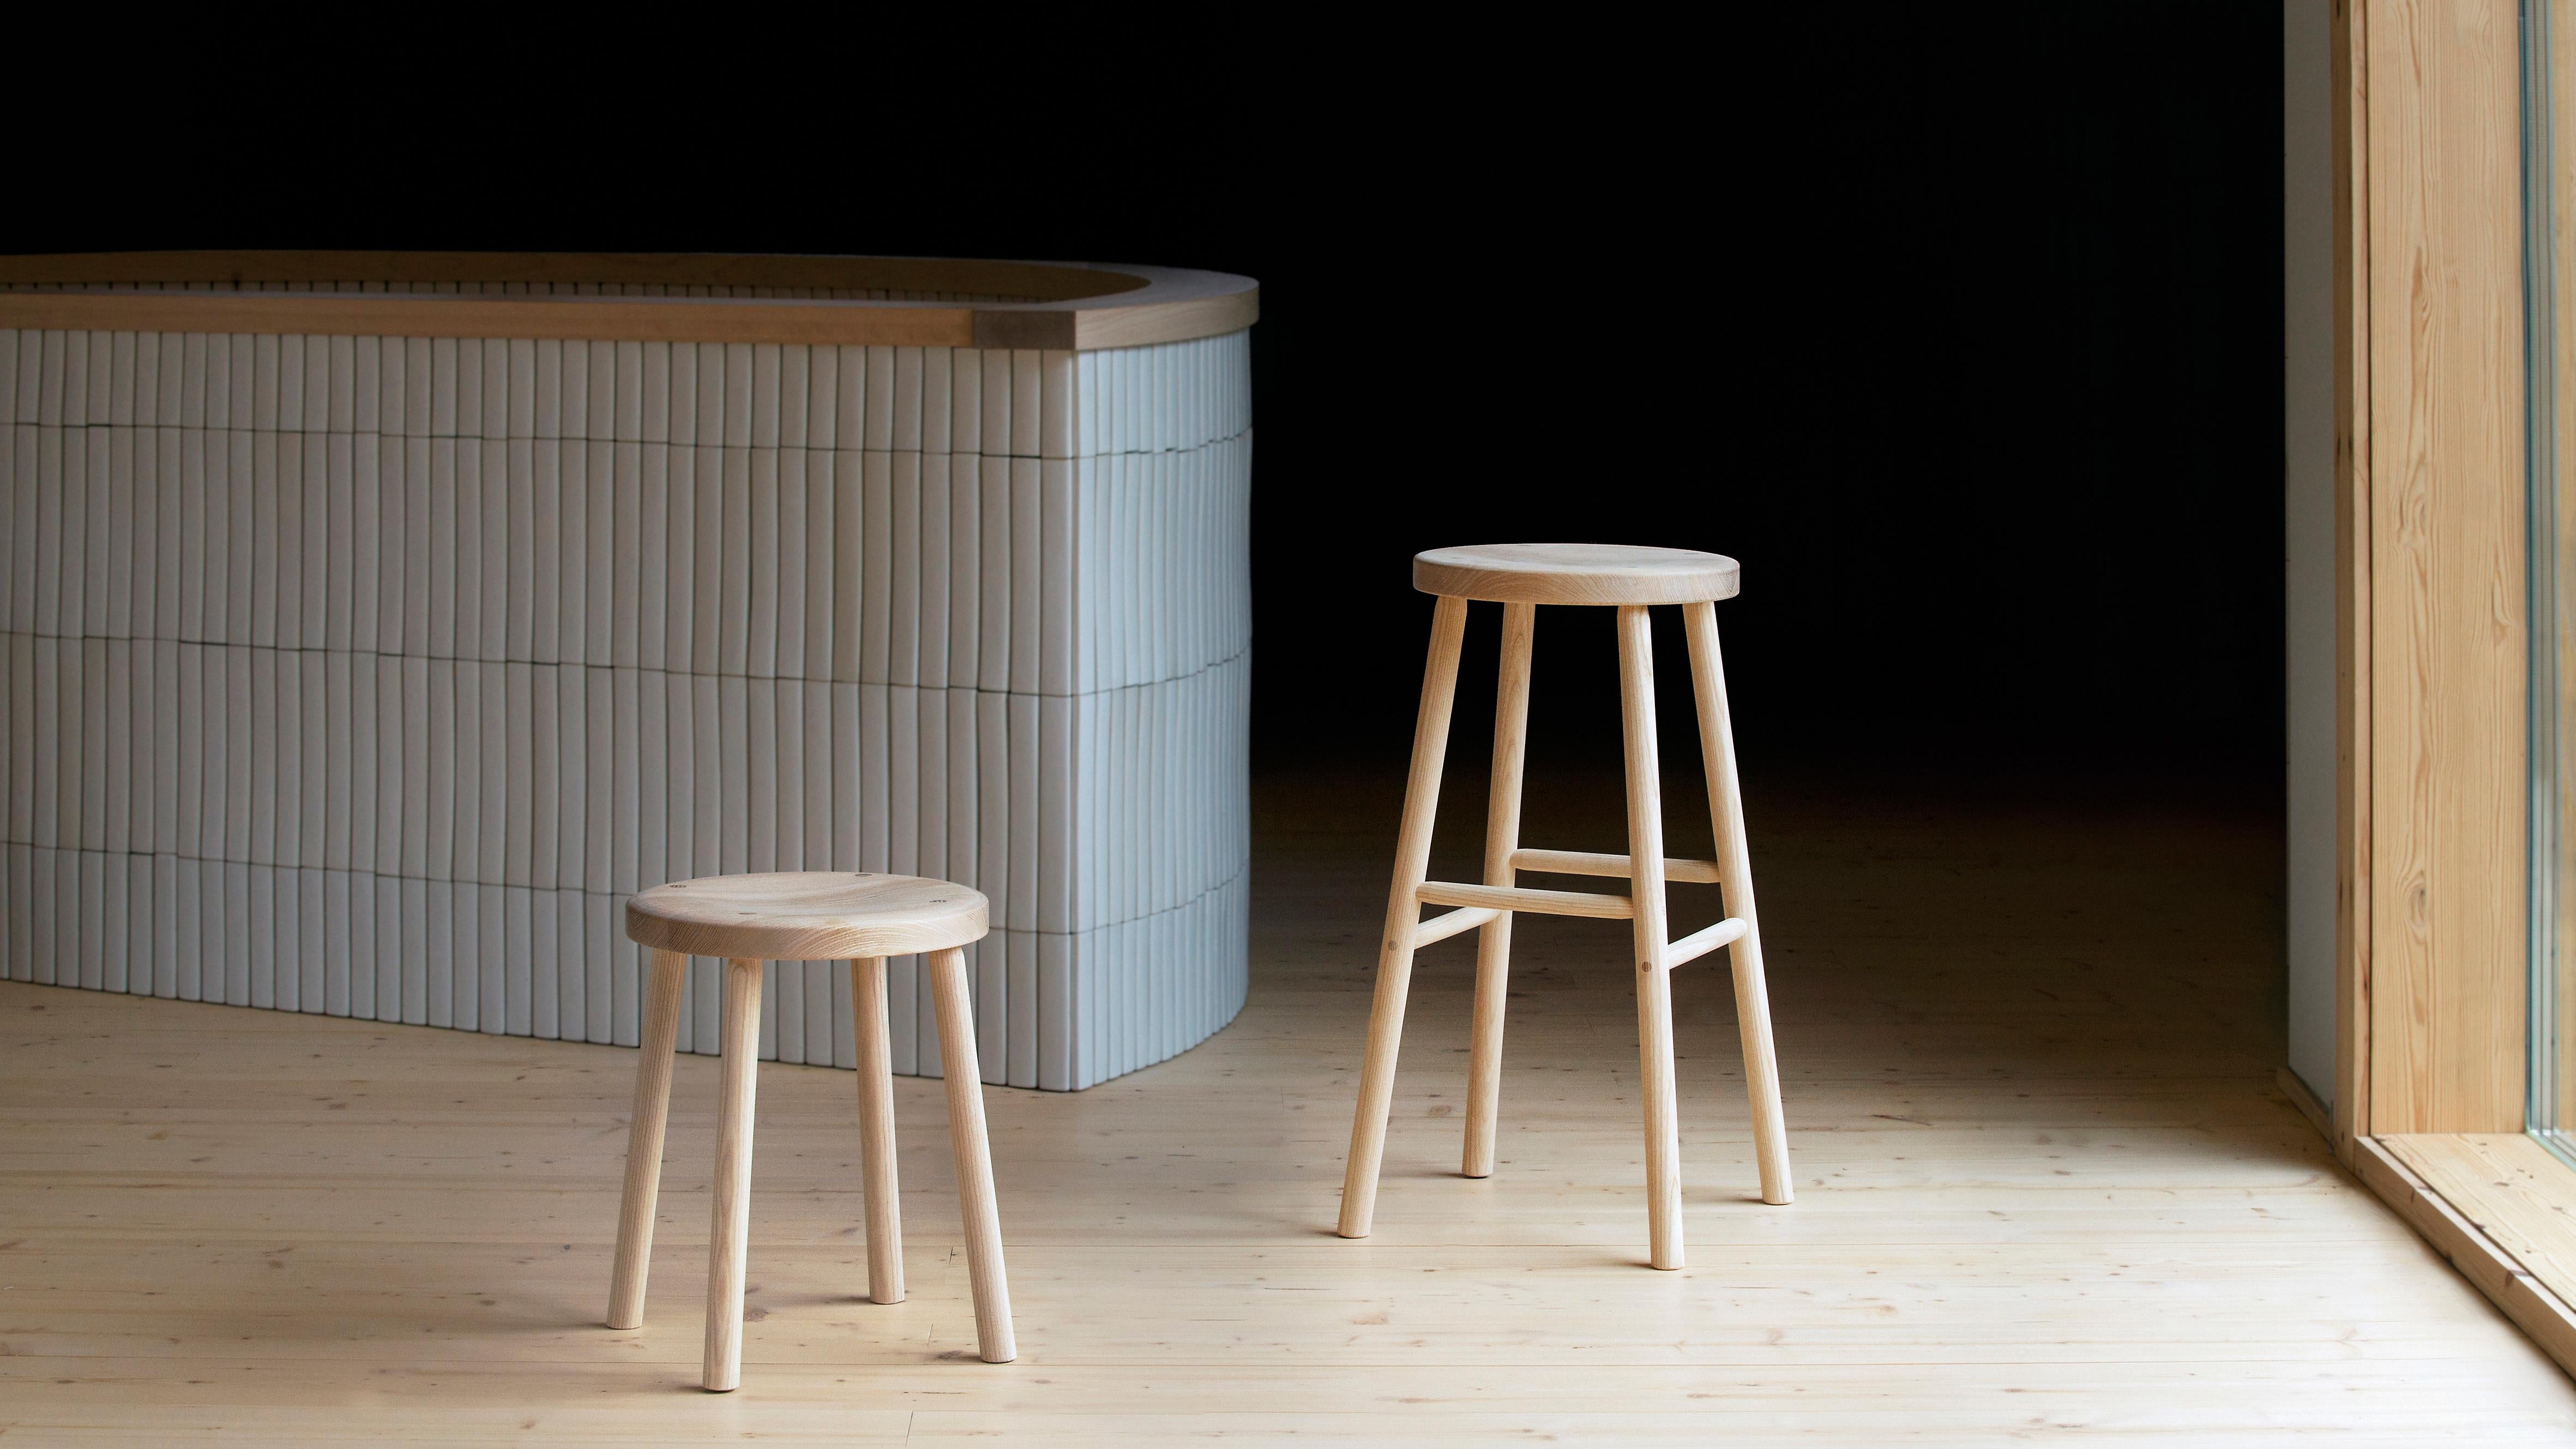 The four-legged stool is designed for both contract environment and domestic use with durable joints, comfortable seat and three different heights. Its Nordic craftsmanship soul can be spotted in the delicate joinery details, where the designer, the